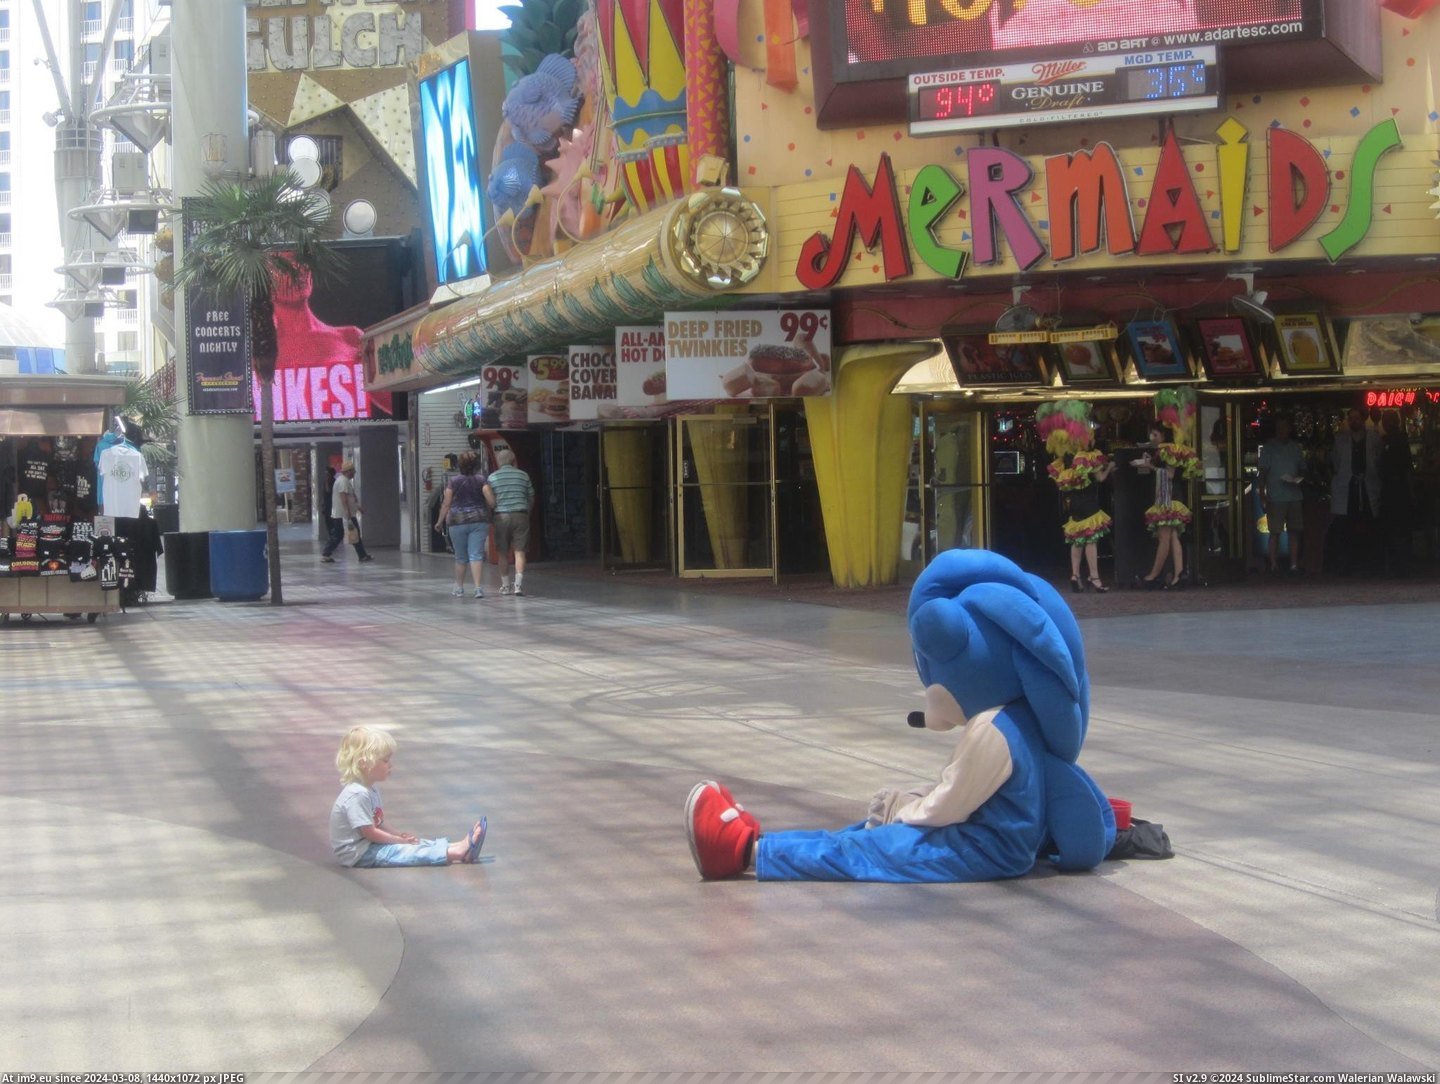 #Girl #Street #Shy #Conversation #Fremont #Sonic #Afraid #Sat [Pics] This shy little girl was afraid to get close to Fremont Street's Sonic, so they sat down and had a 'conversation' a few f Pic. (Image of album My r/PICS favs))